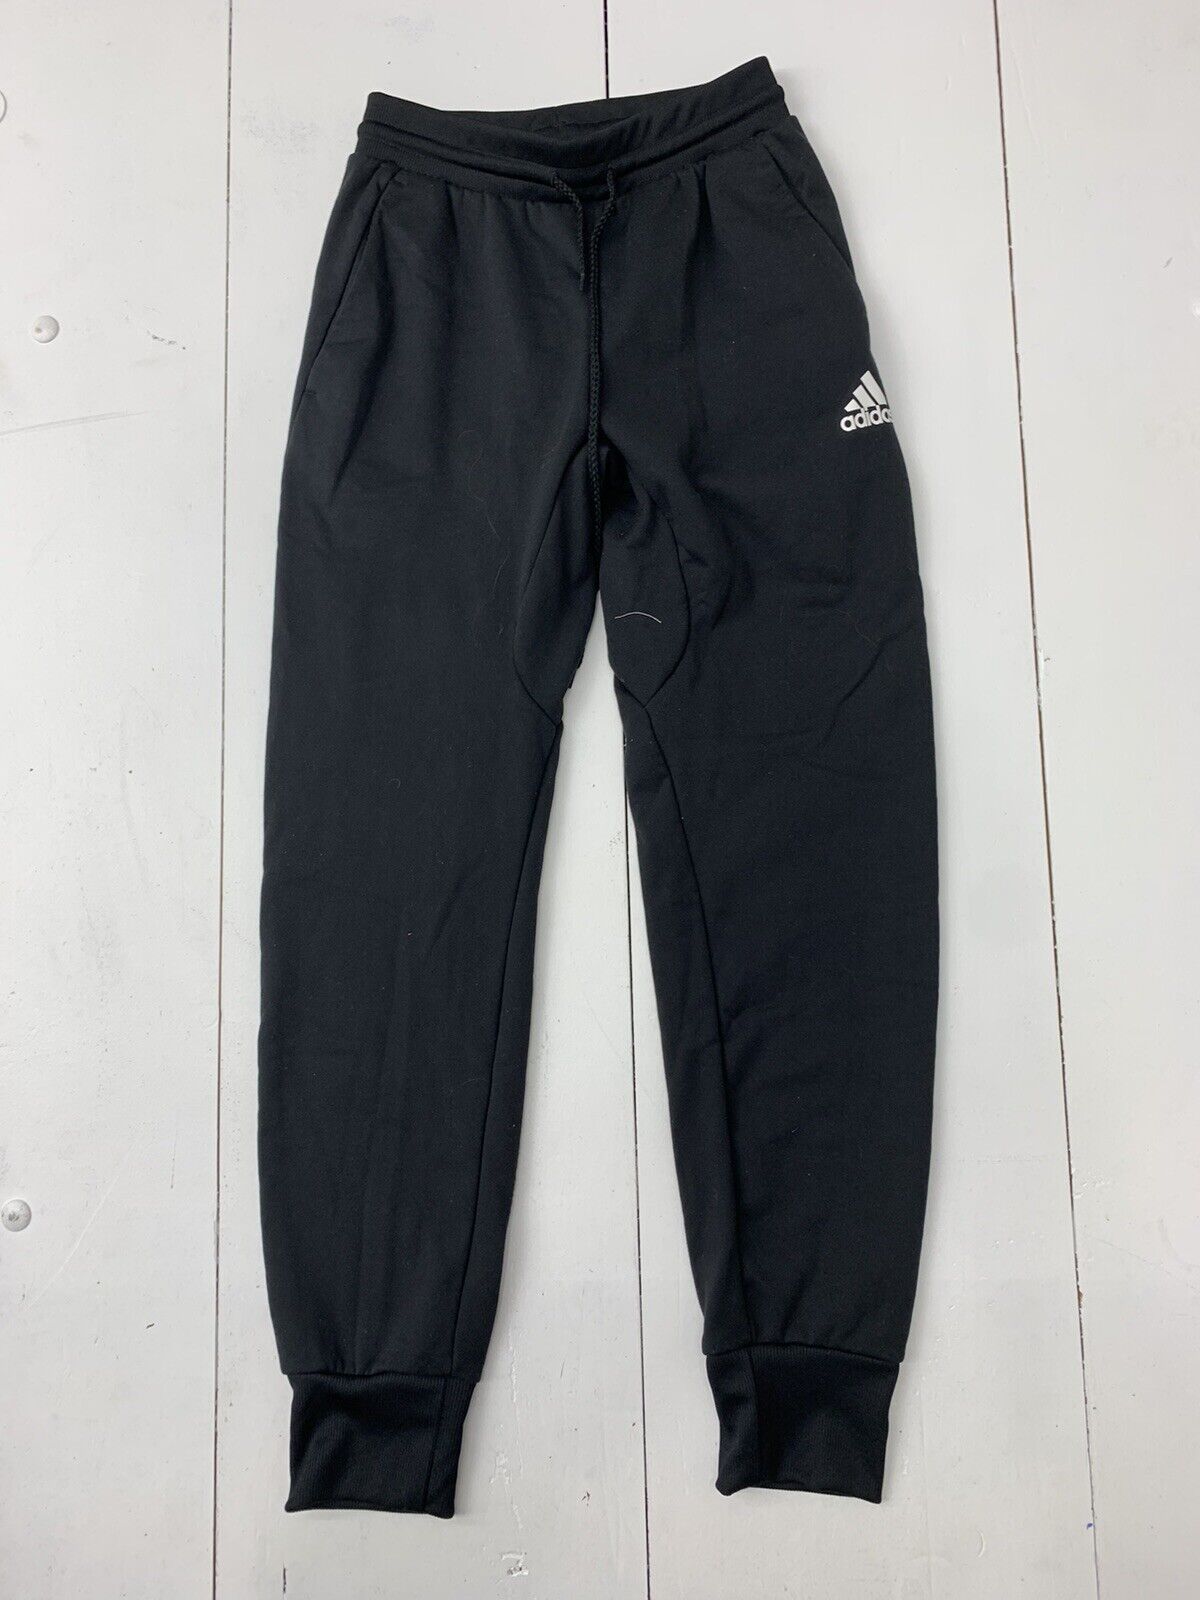 Adidas Black Athletic Joggers Mens Size Small